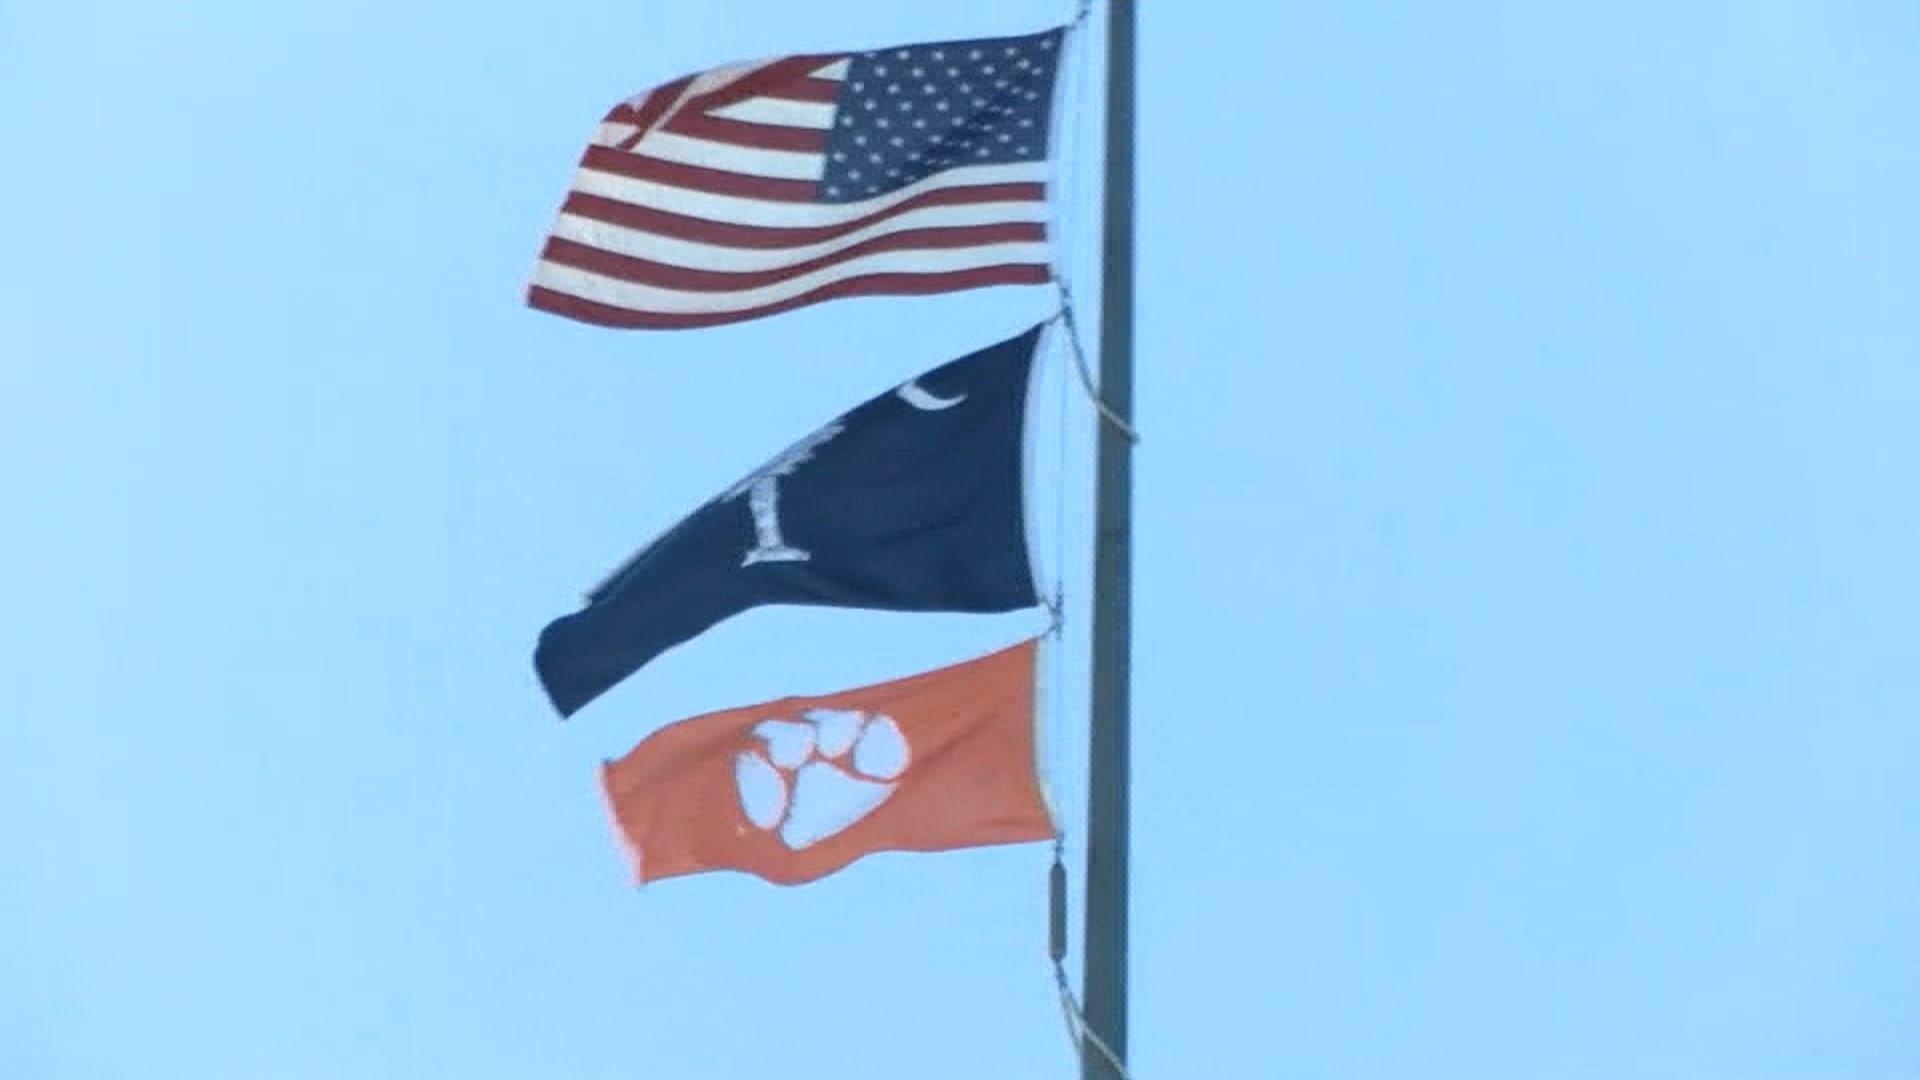 The Clemson Tigers flag is flying high above South Carolina's State House, after the team's resounding win over Alabama for the national championship.